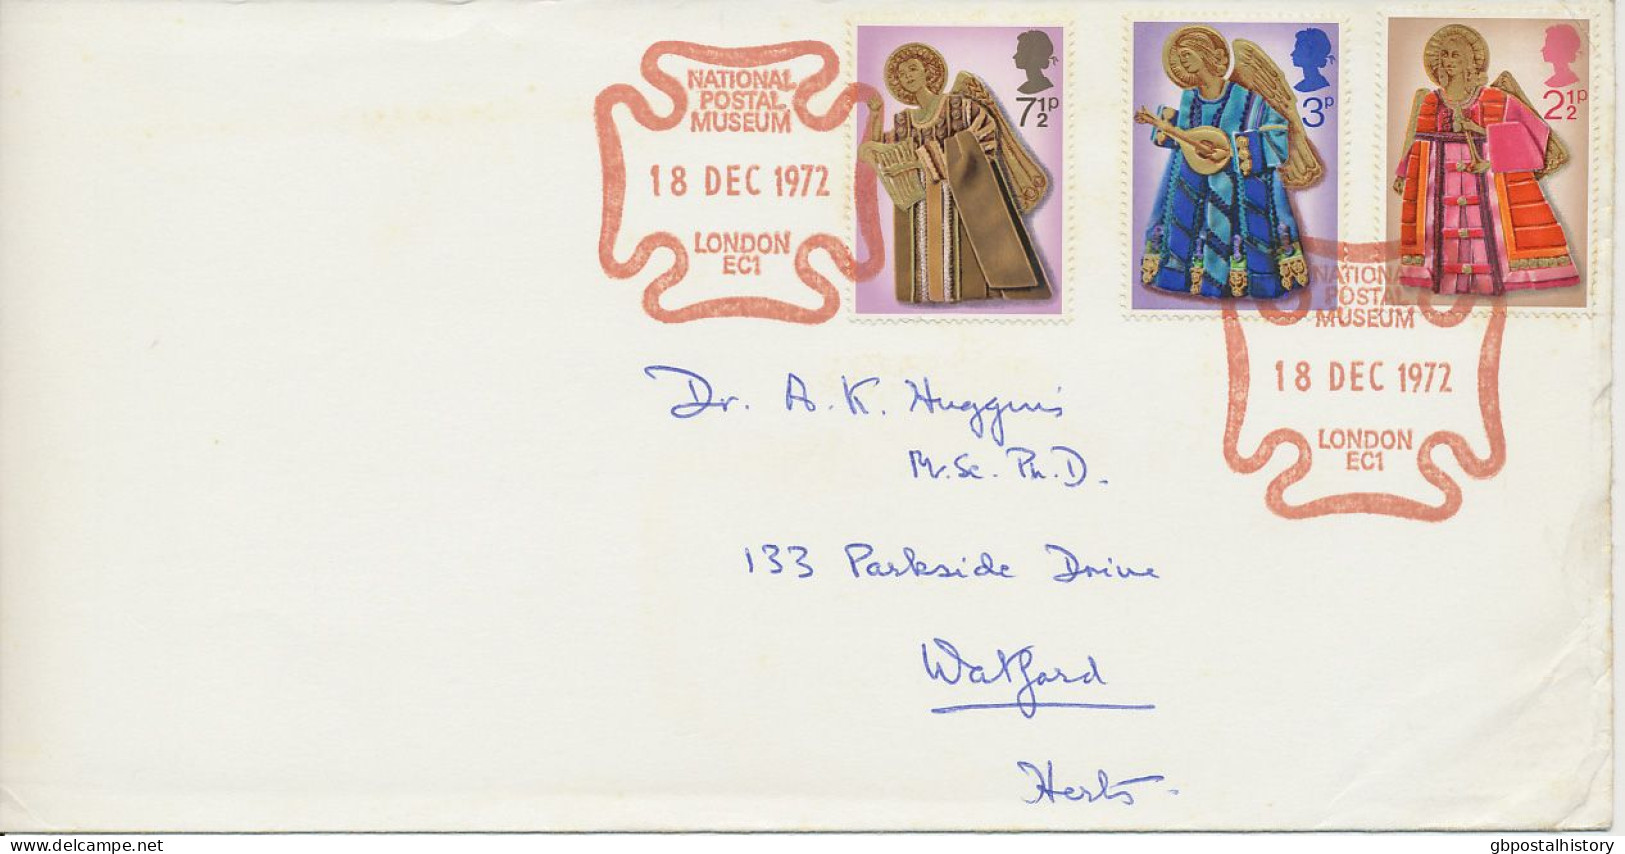 GB SPECIAL EVENT POSTMARKS 1972 NATIONAL POSTAL MUSEUM LONDON EC1 - STRUCK IN BROWN-RED, SMALL FAULTS – ADRESSED TO THE - Briefe U. Dokumente